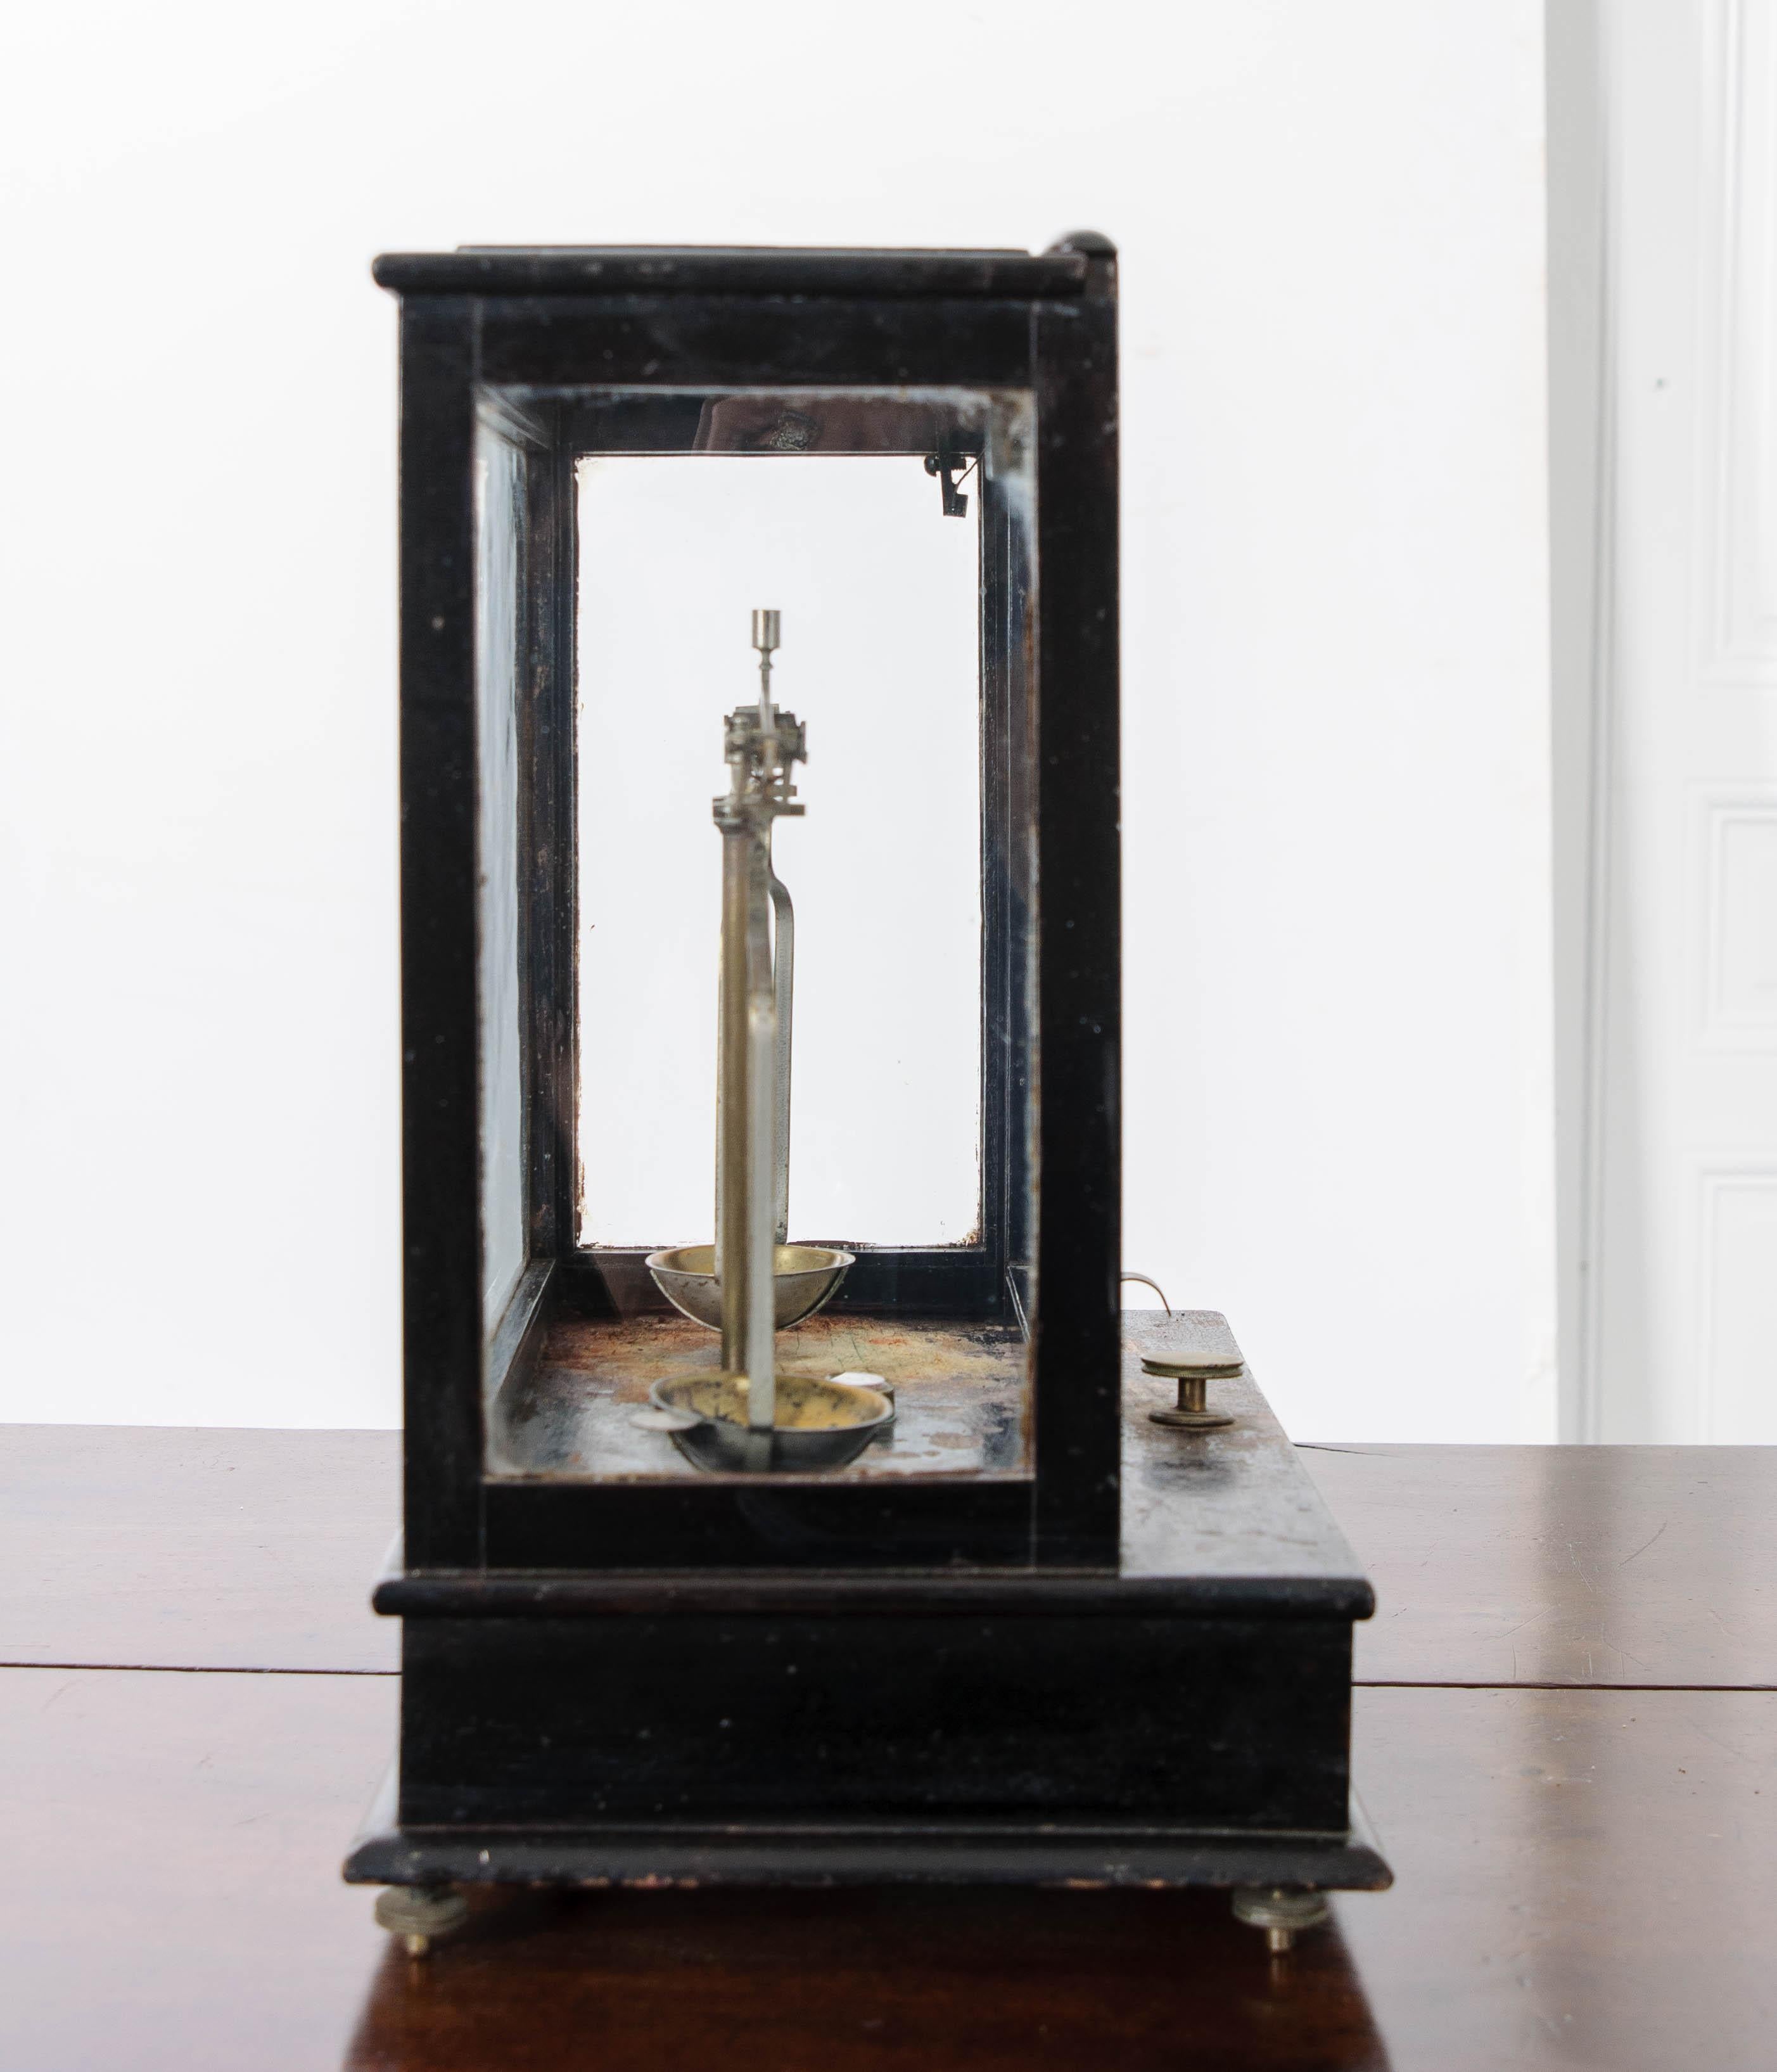 This unique French apothecary scale sits in a ebonized wood and glass case. The front of the case lifts for access to the delicate brass scale. At the base of the scale is an address etched into the plate: ‘G. Viollet 48 Rue La Fayette Paris.’ The